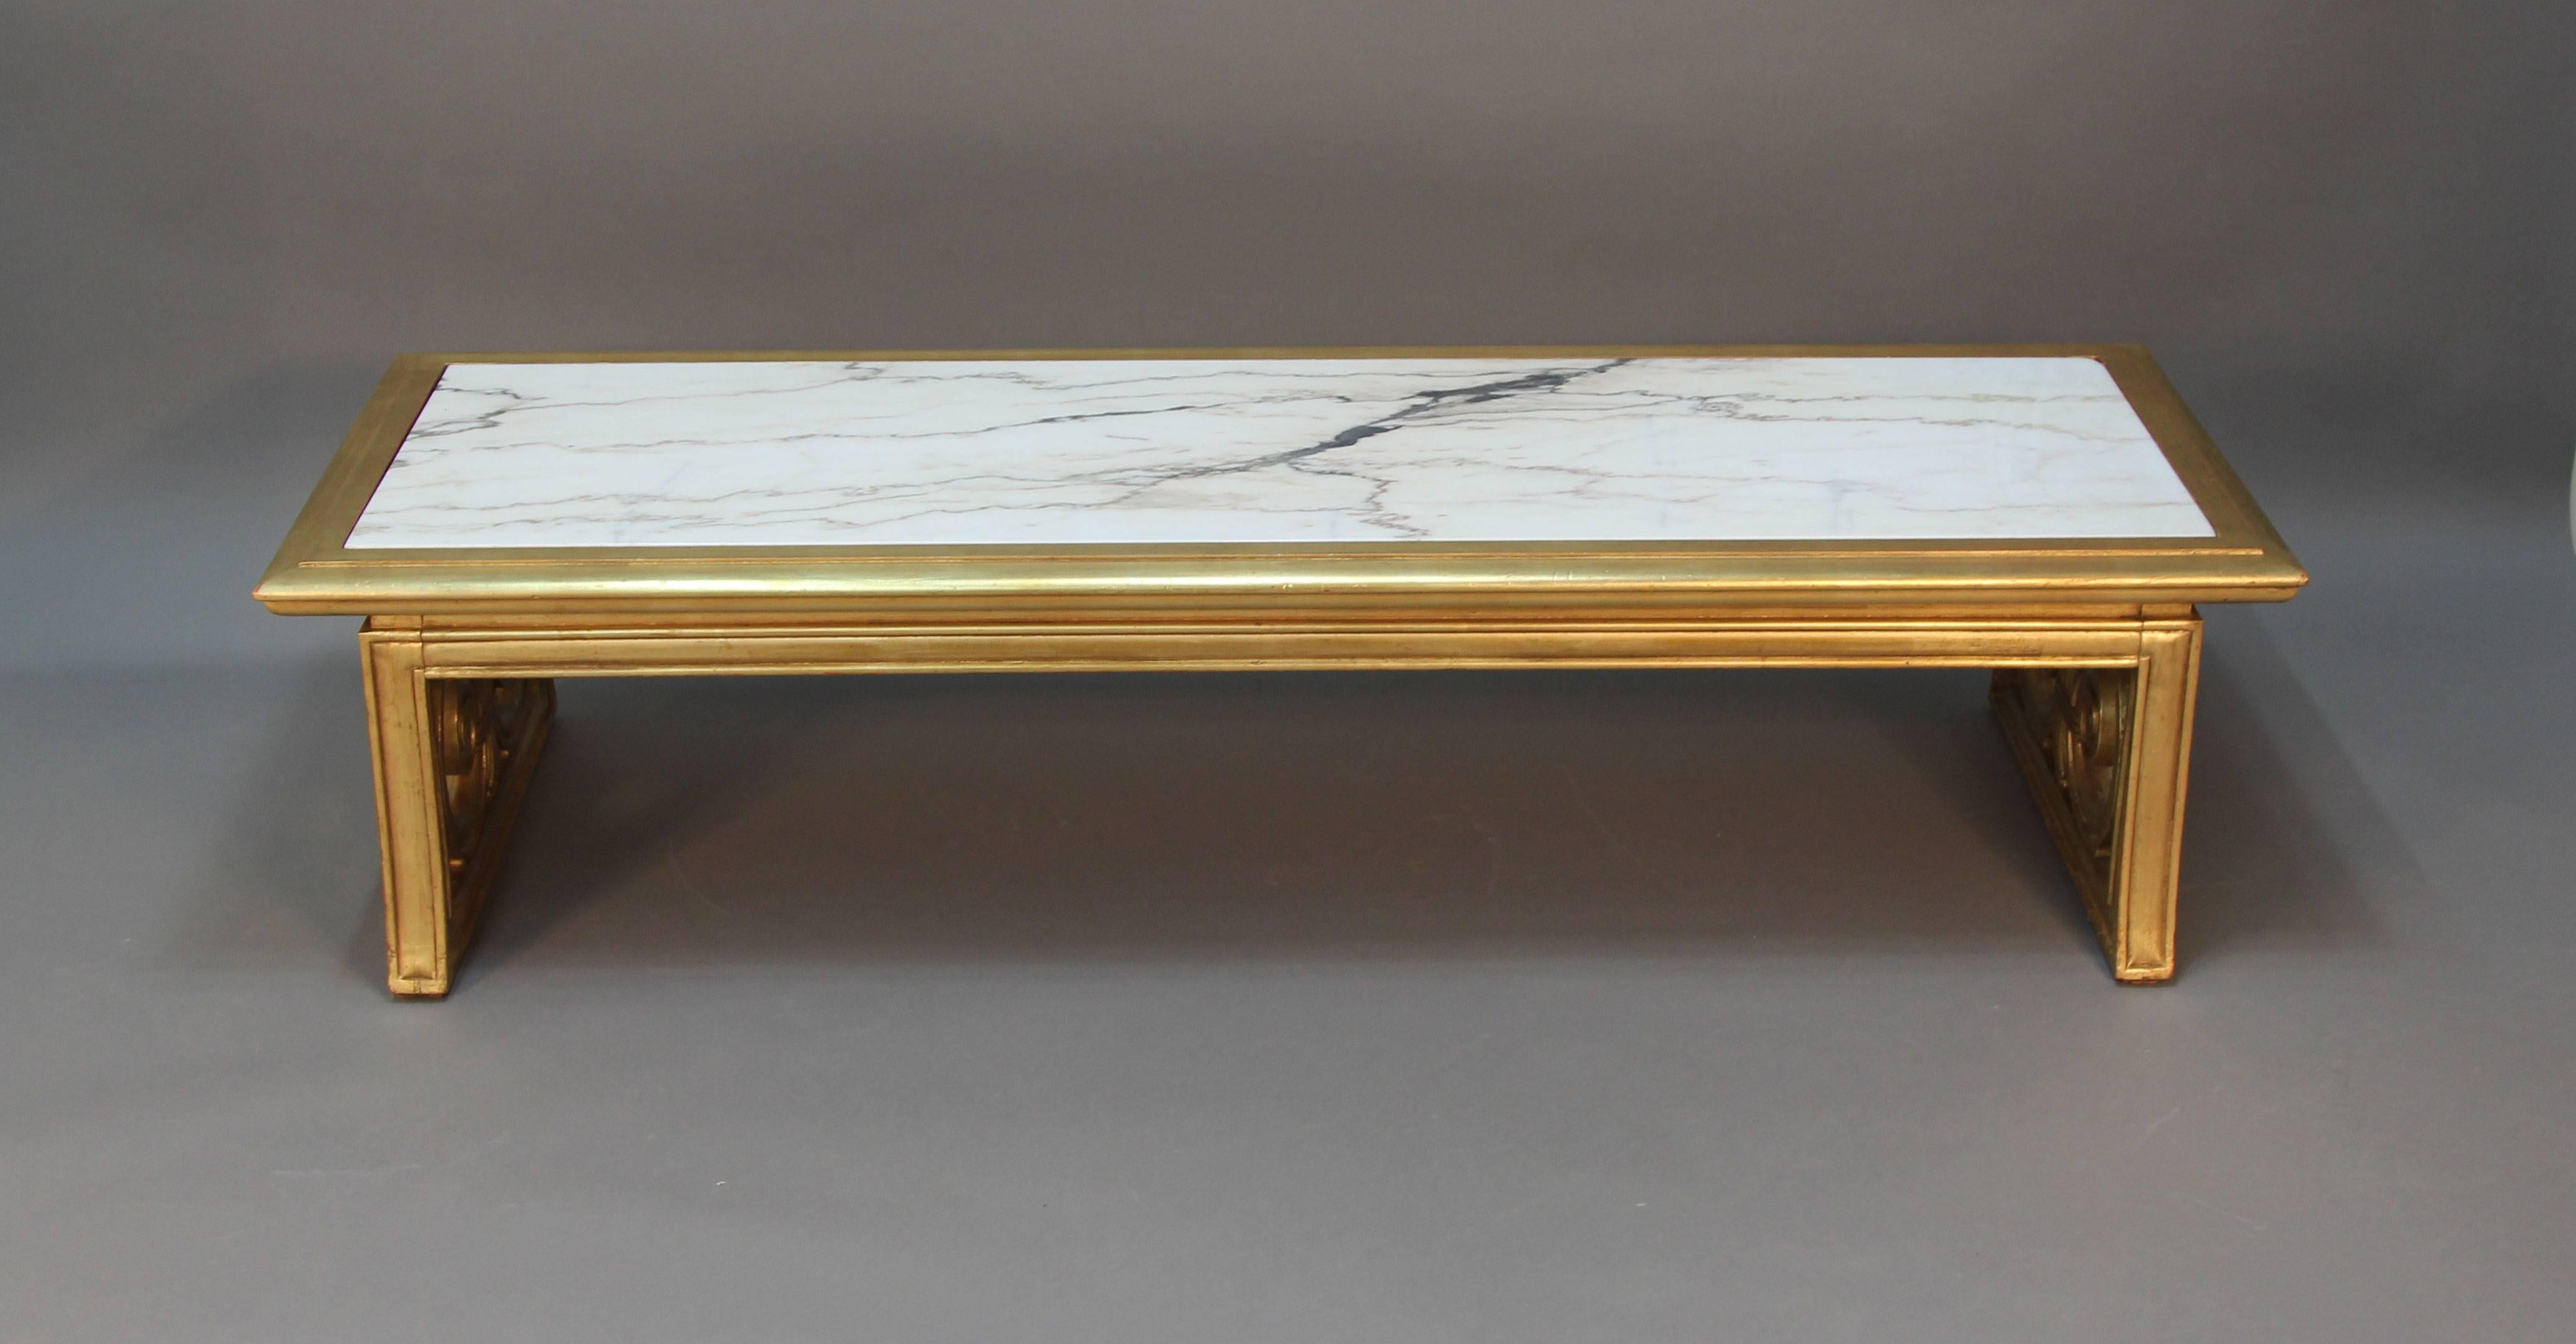 Beautiful newly gold giltwood frame coffee table with Carrara marble inset top. Scroll work detailed sides, neoclassical style.